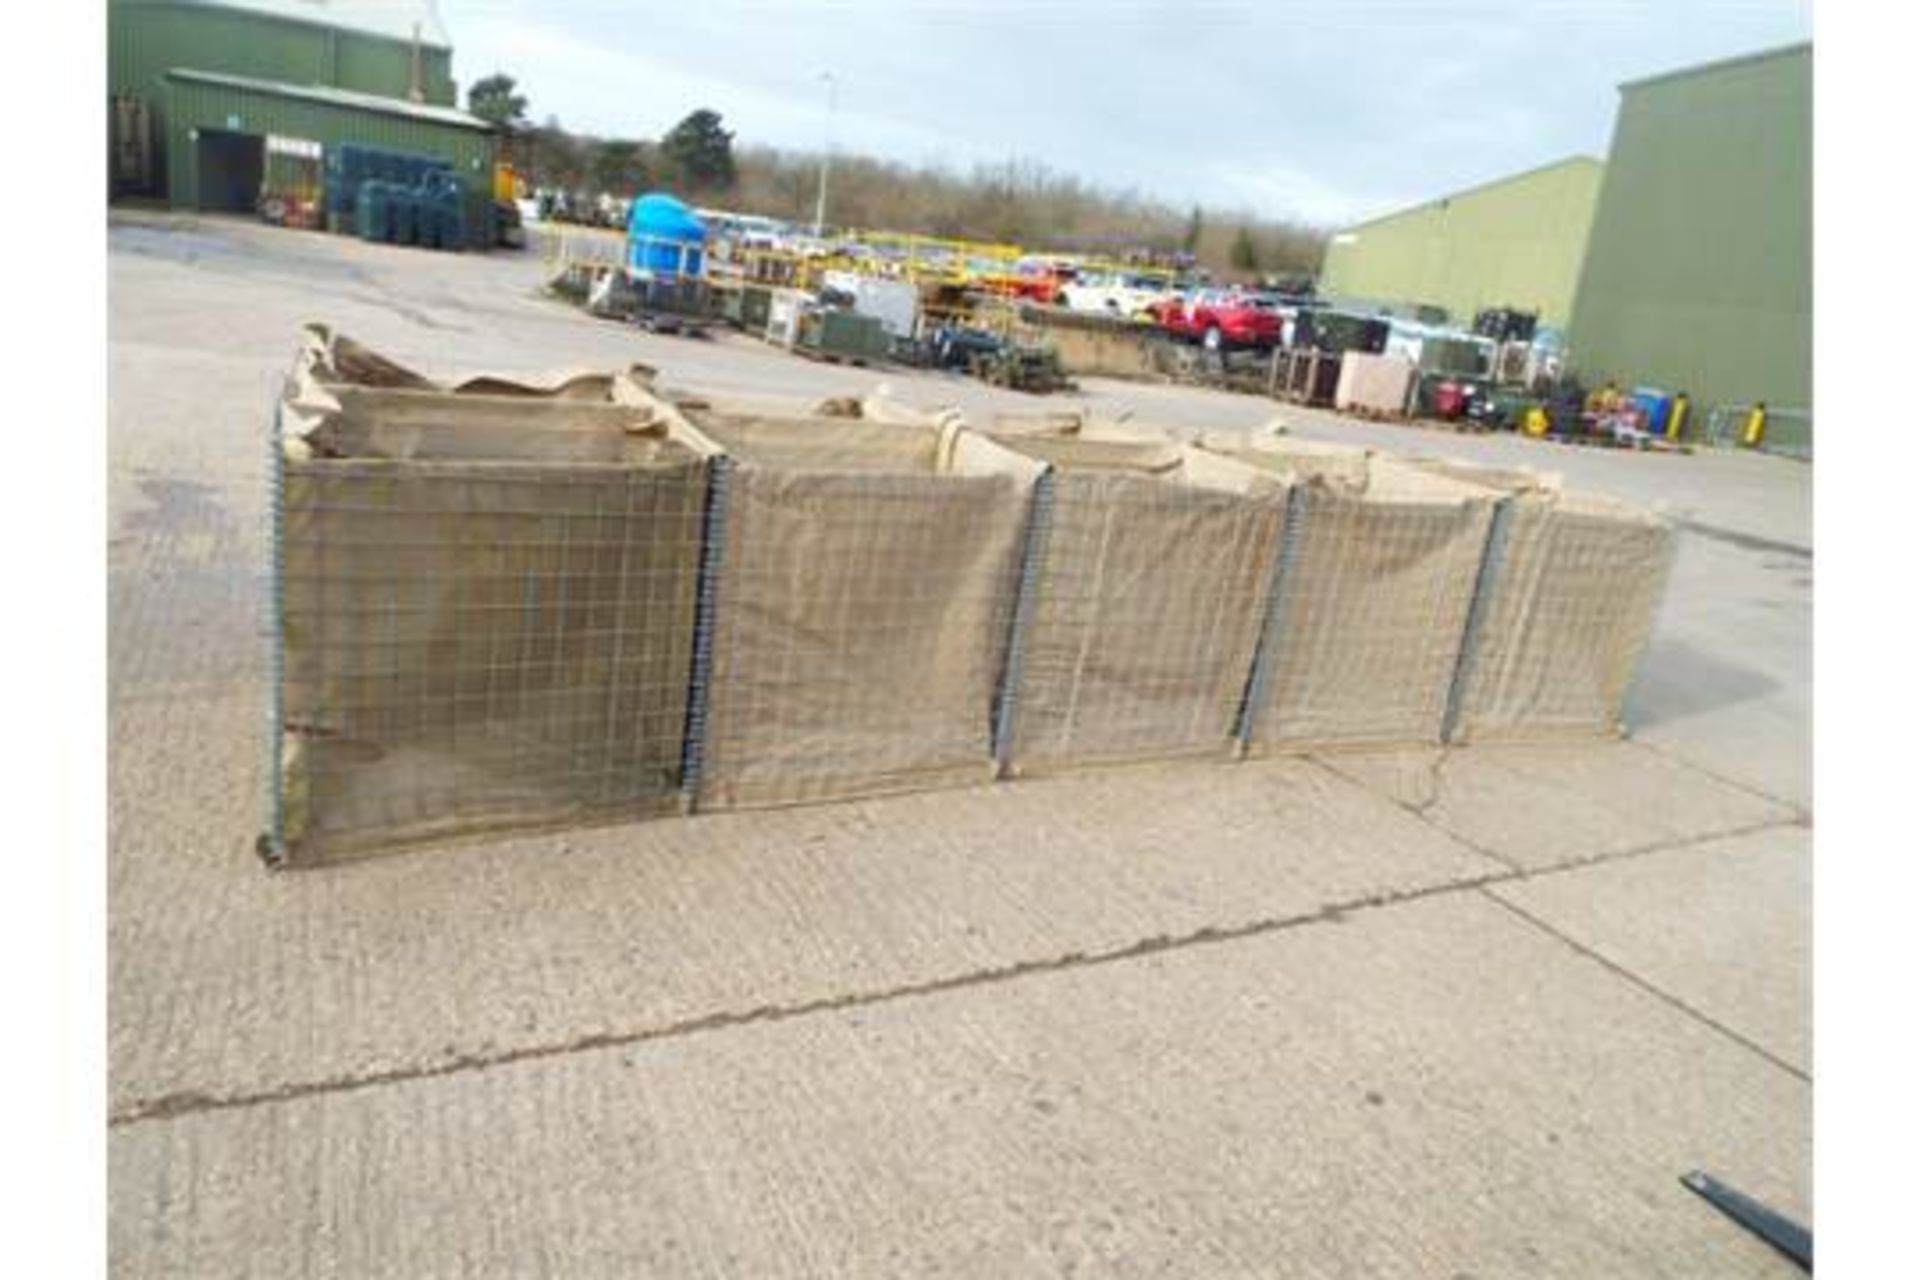 5m x 1.6m x 1m Hesco Mil 31311 10 Section Defensive Barrier - Image 2 of 6